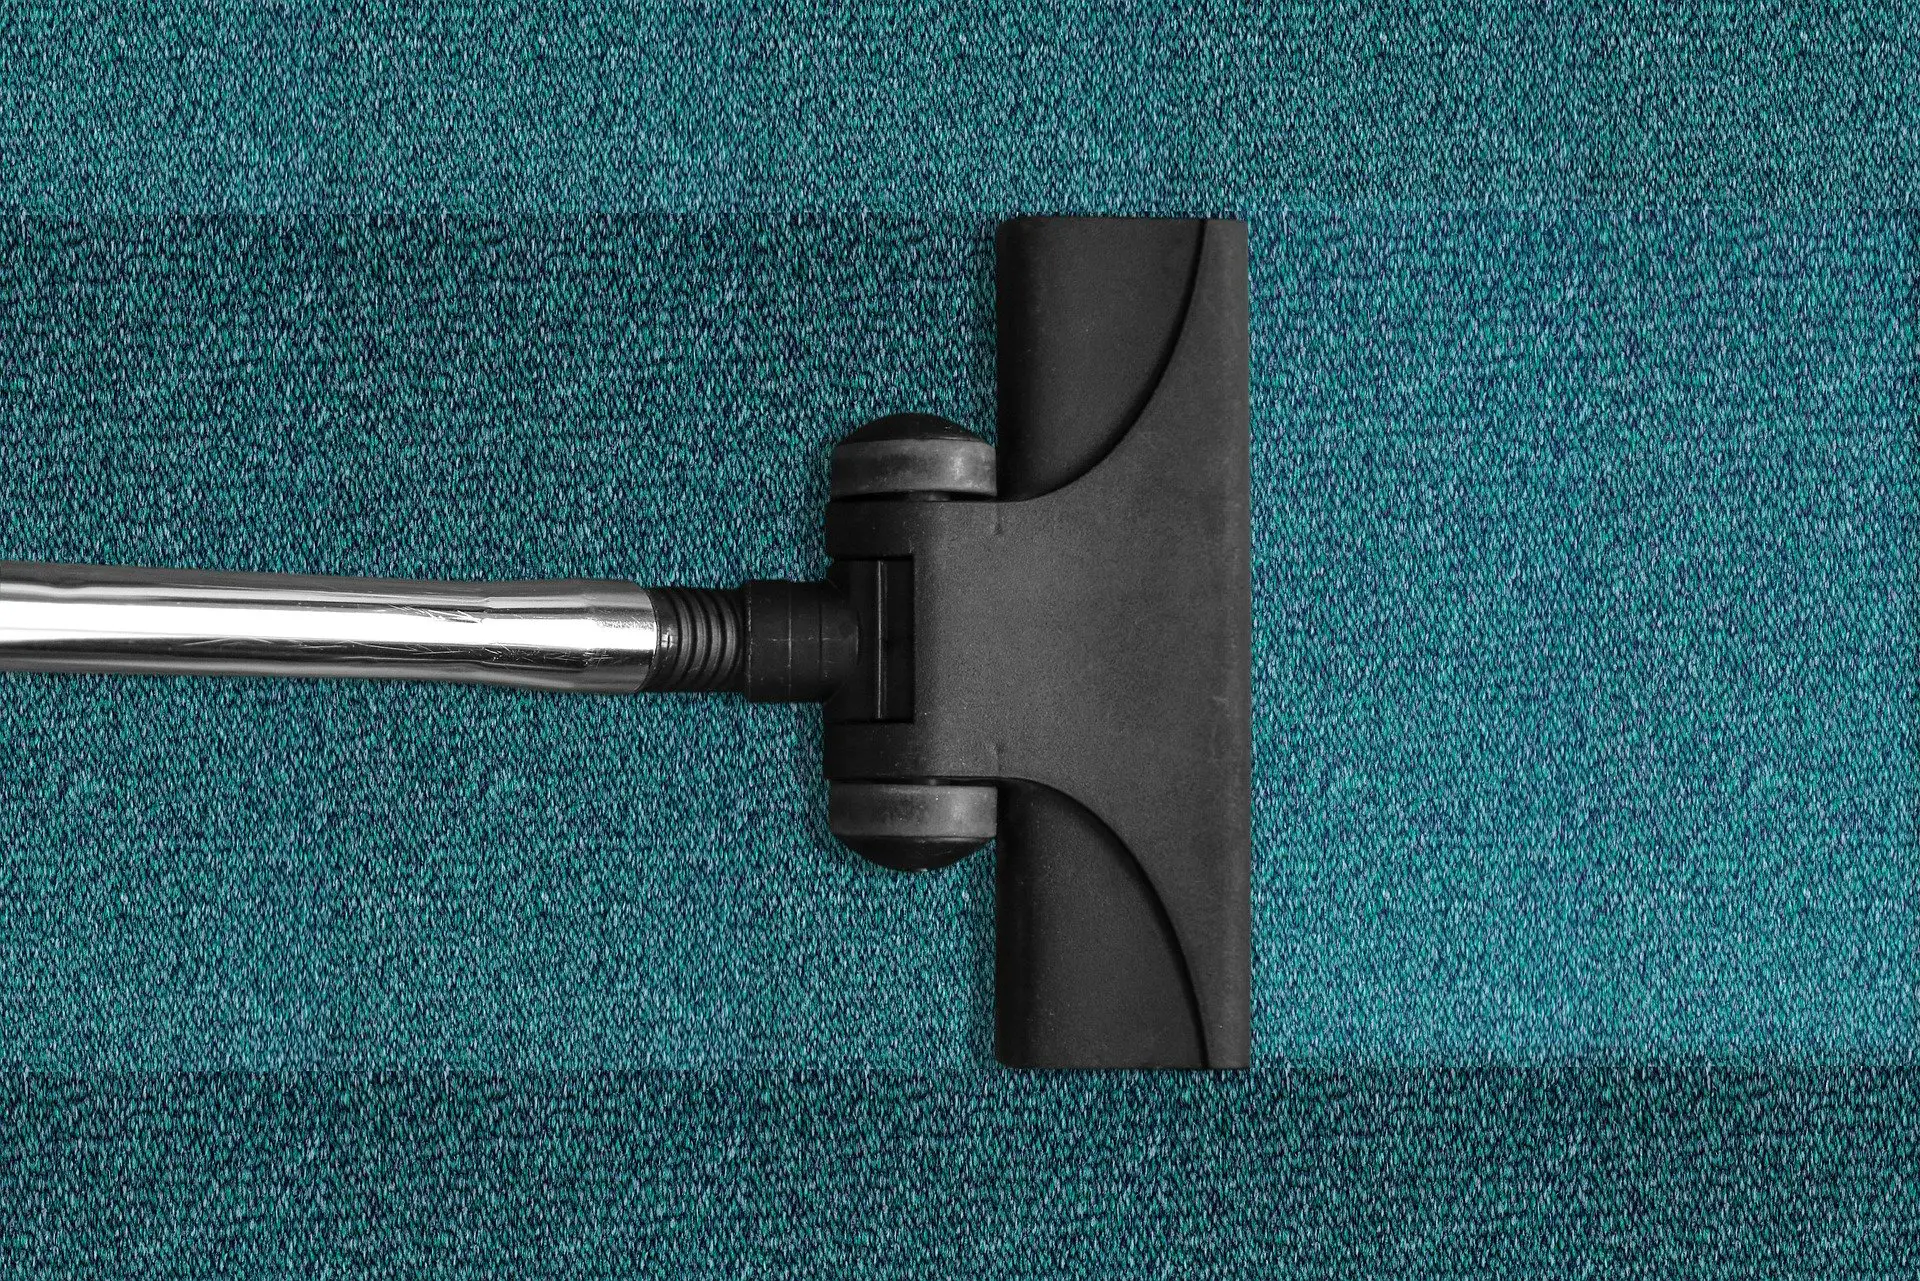 Is Carpet Ever A Good Choice For Business Flooring?